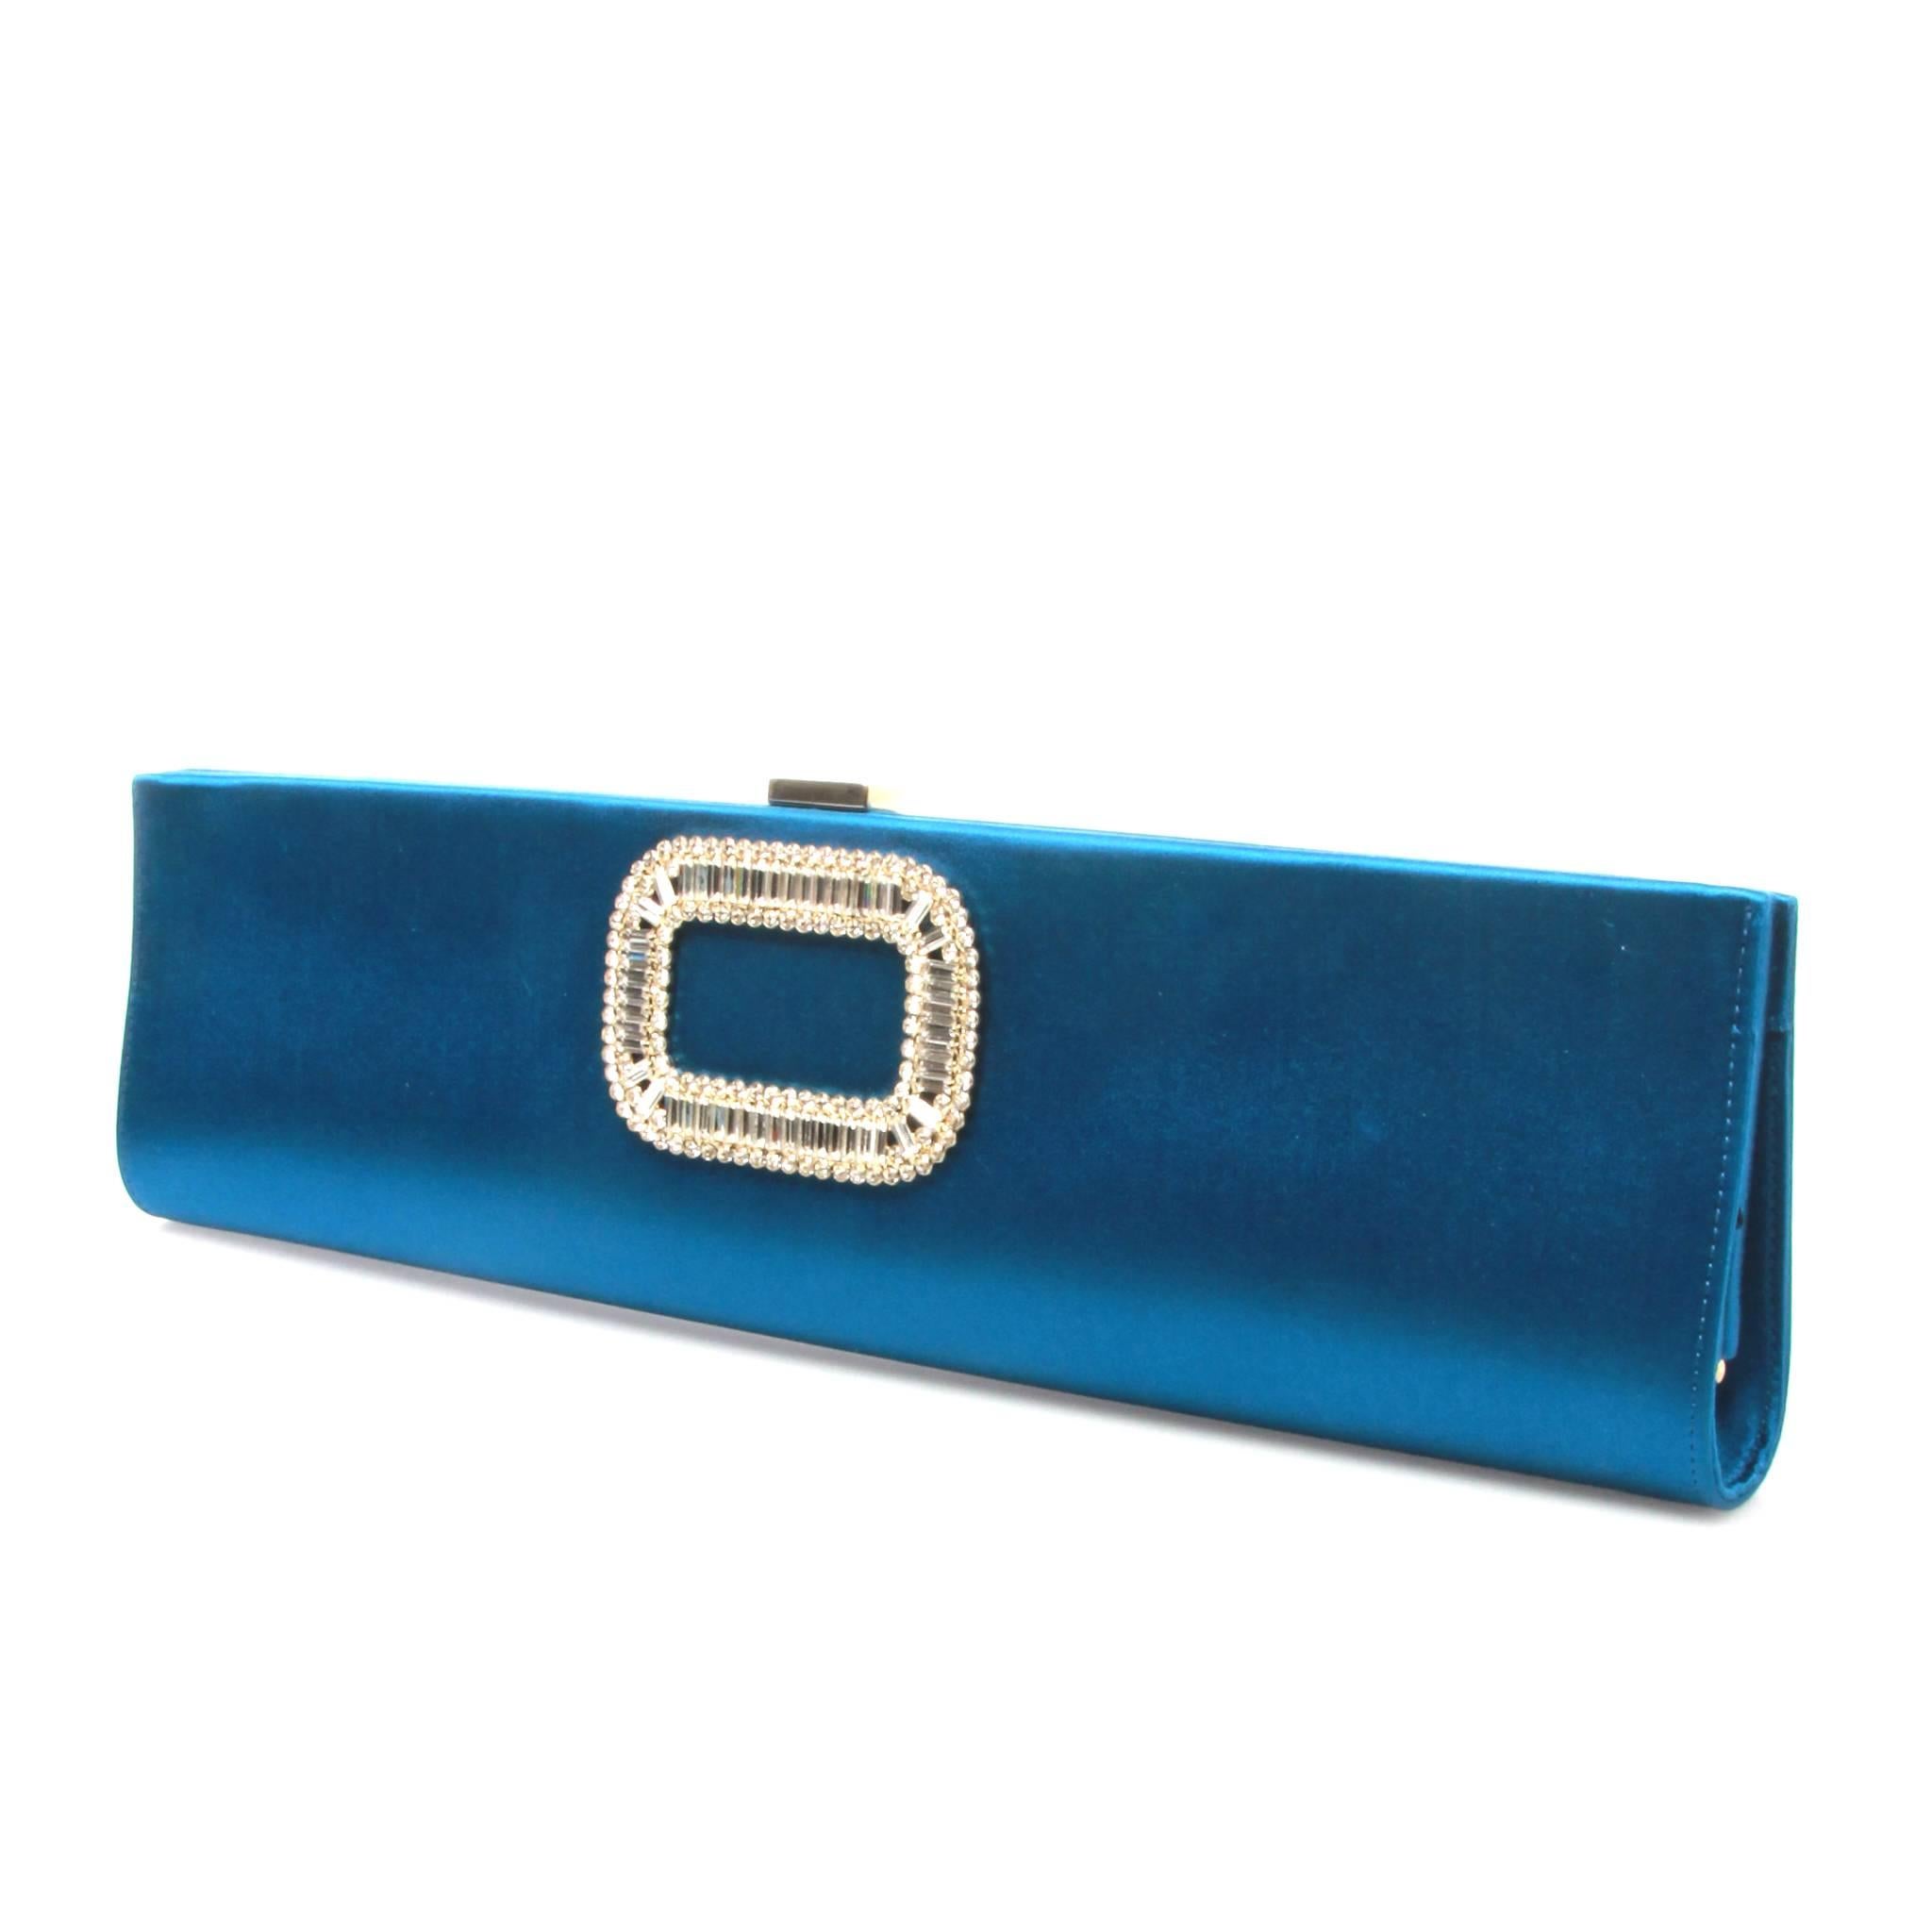 Blue satin Roger Vivier clutch with silver-tone hardware, crystal embellishments at front, tonal satin interior lining and push-lock closure at top. 